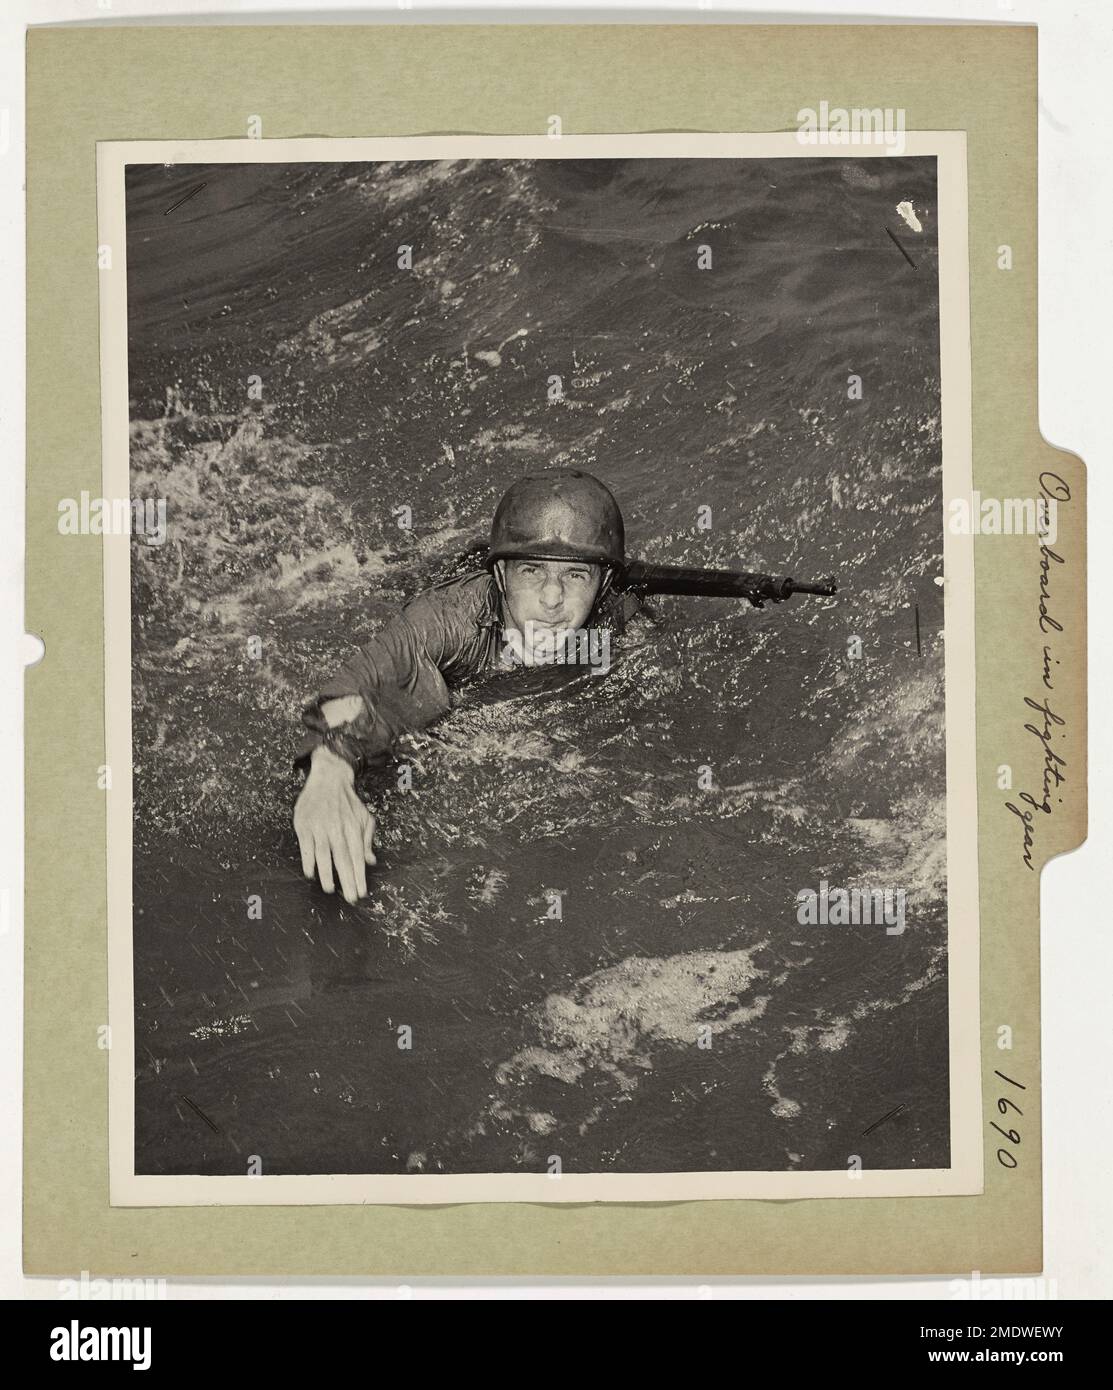 Overboard in Full Fighting Gear. A fighting Coast Guardsman is give rigorous training under battle conditions. Plunging into the sea, rifle, helmet and all, he swims for shore, preparing himself for such an emergency in the far-flung sea fronts of the war. Stock Photo